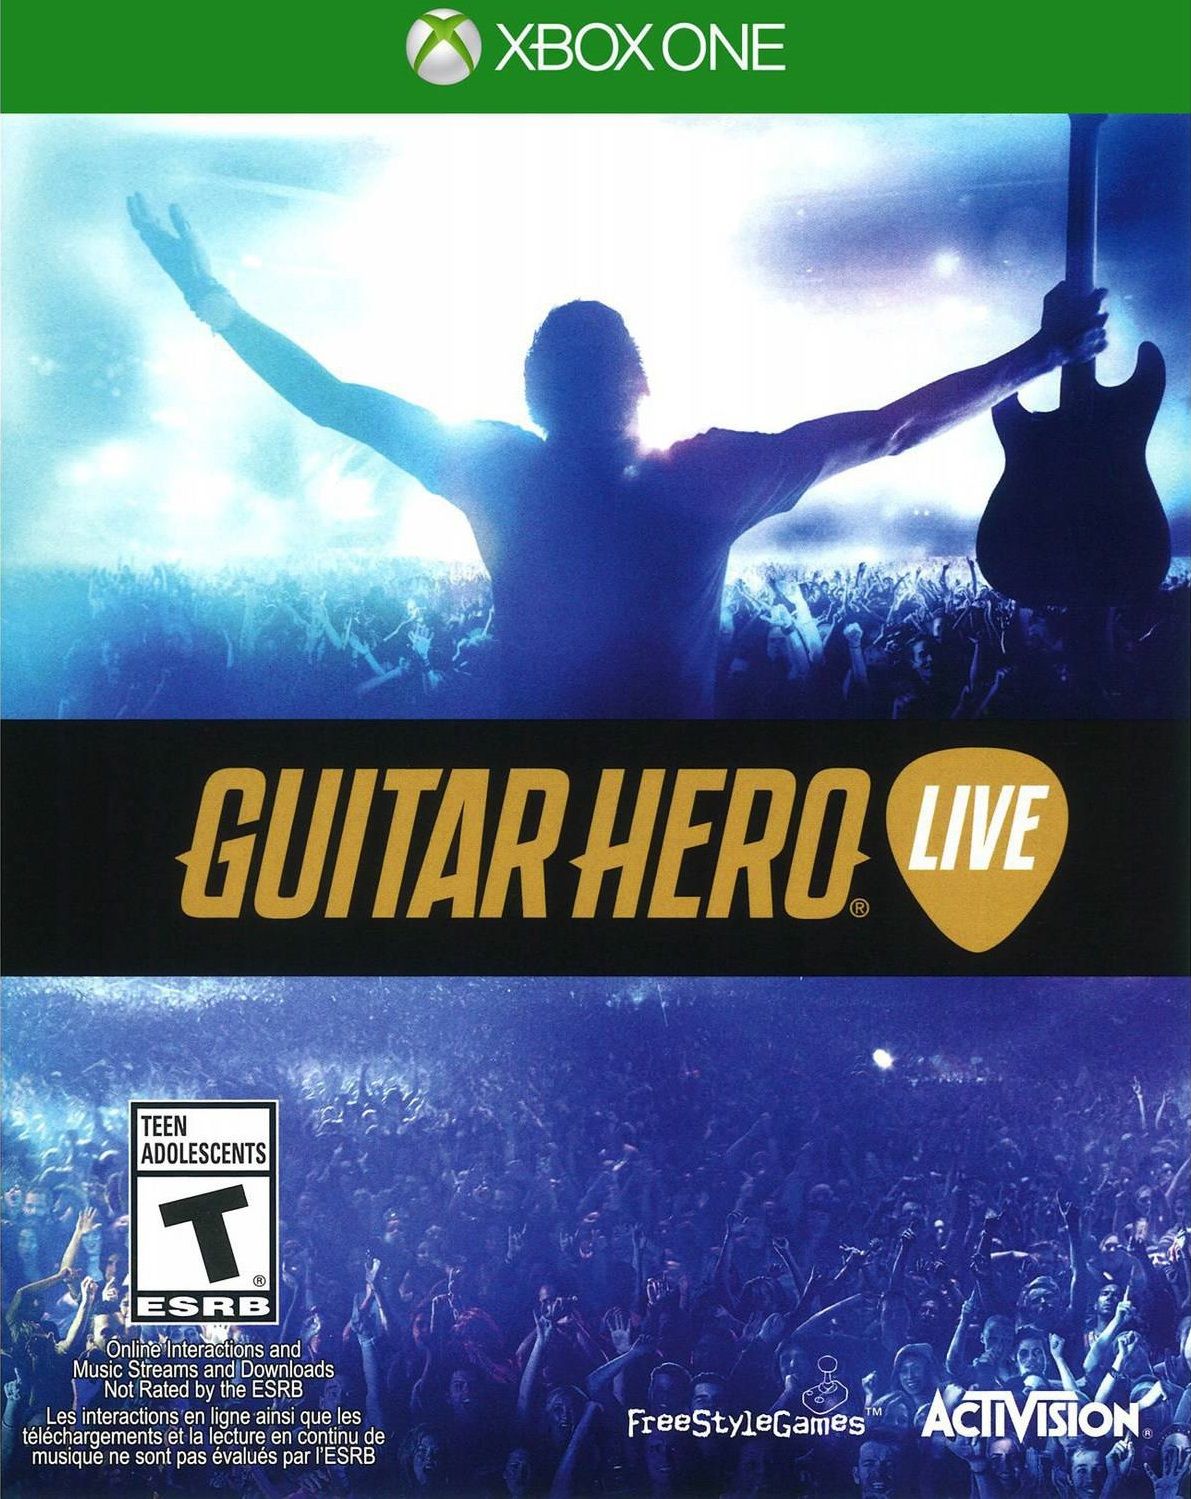 guitar hero 3 dlc isnt available anymore